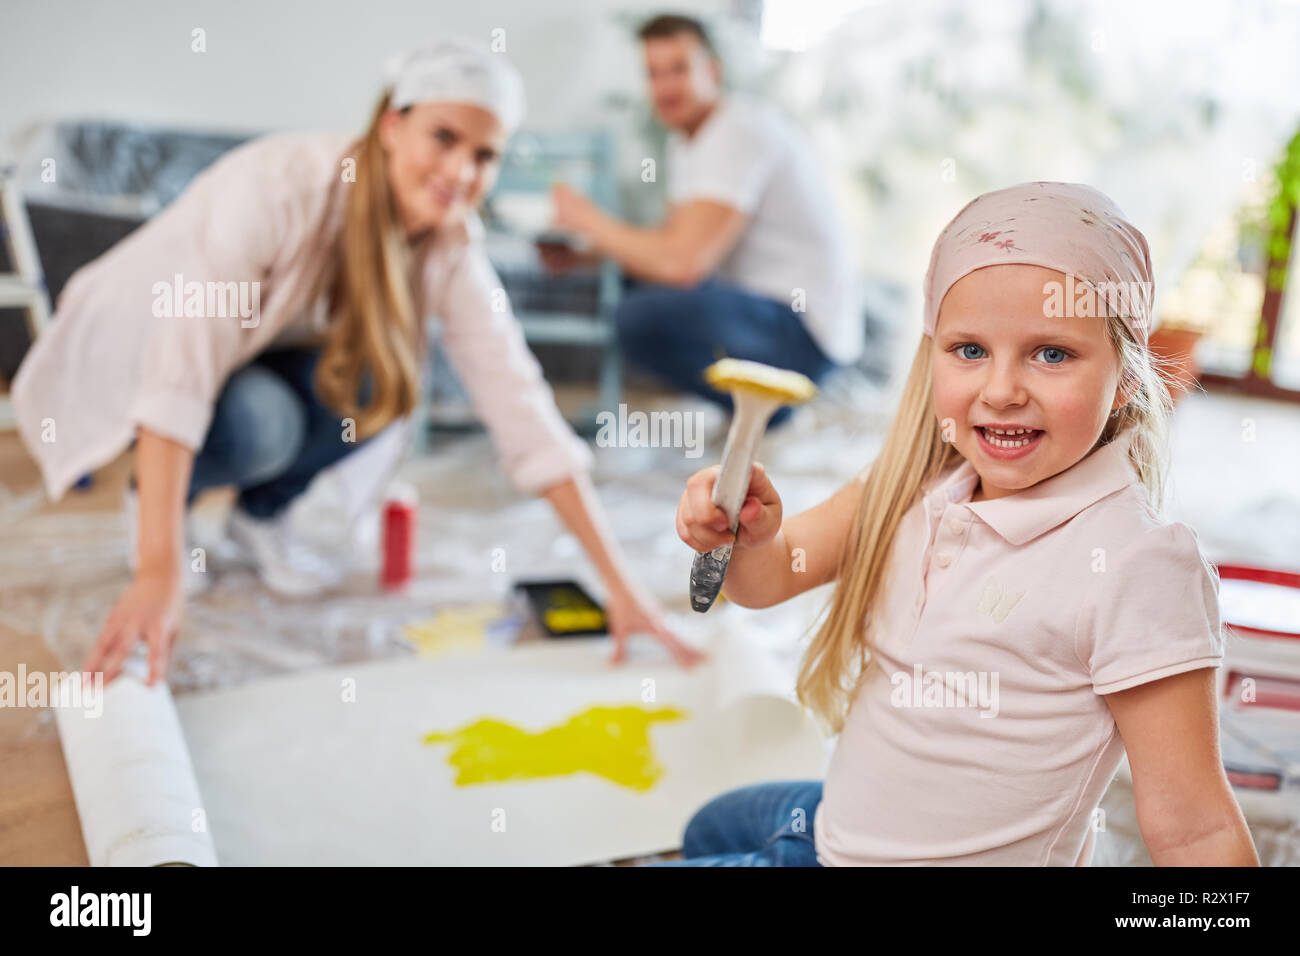 Little girl has fun while painting with family in new home Stock Photo